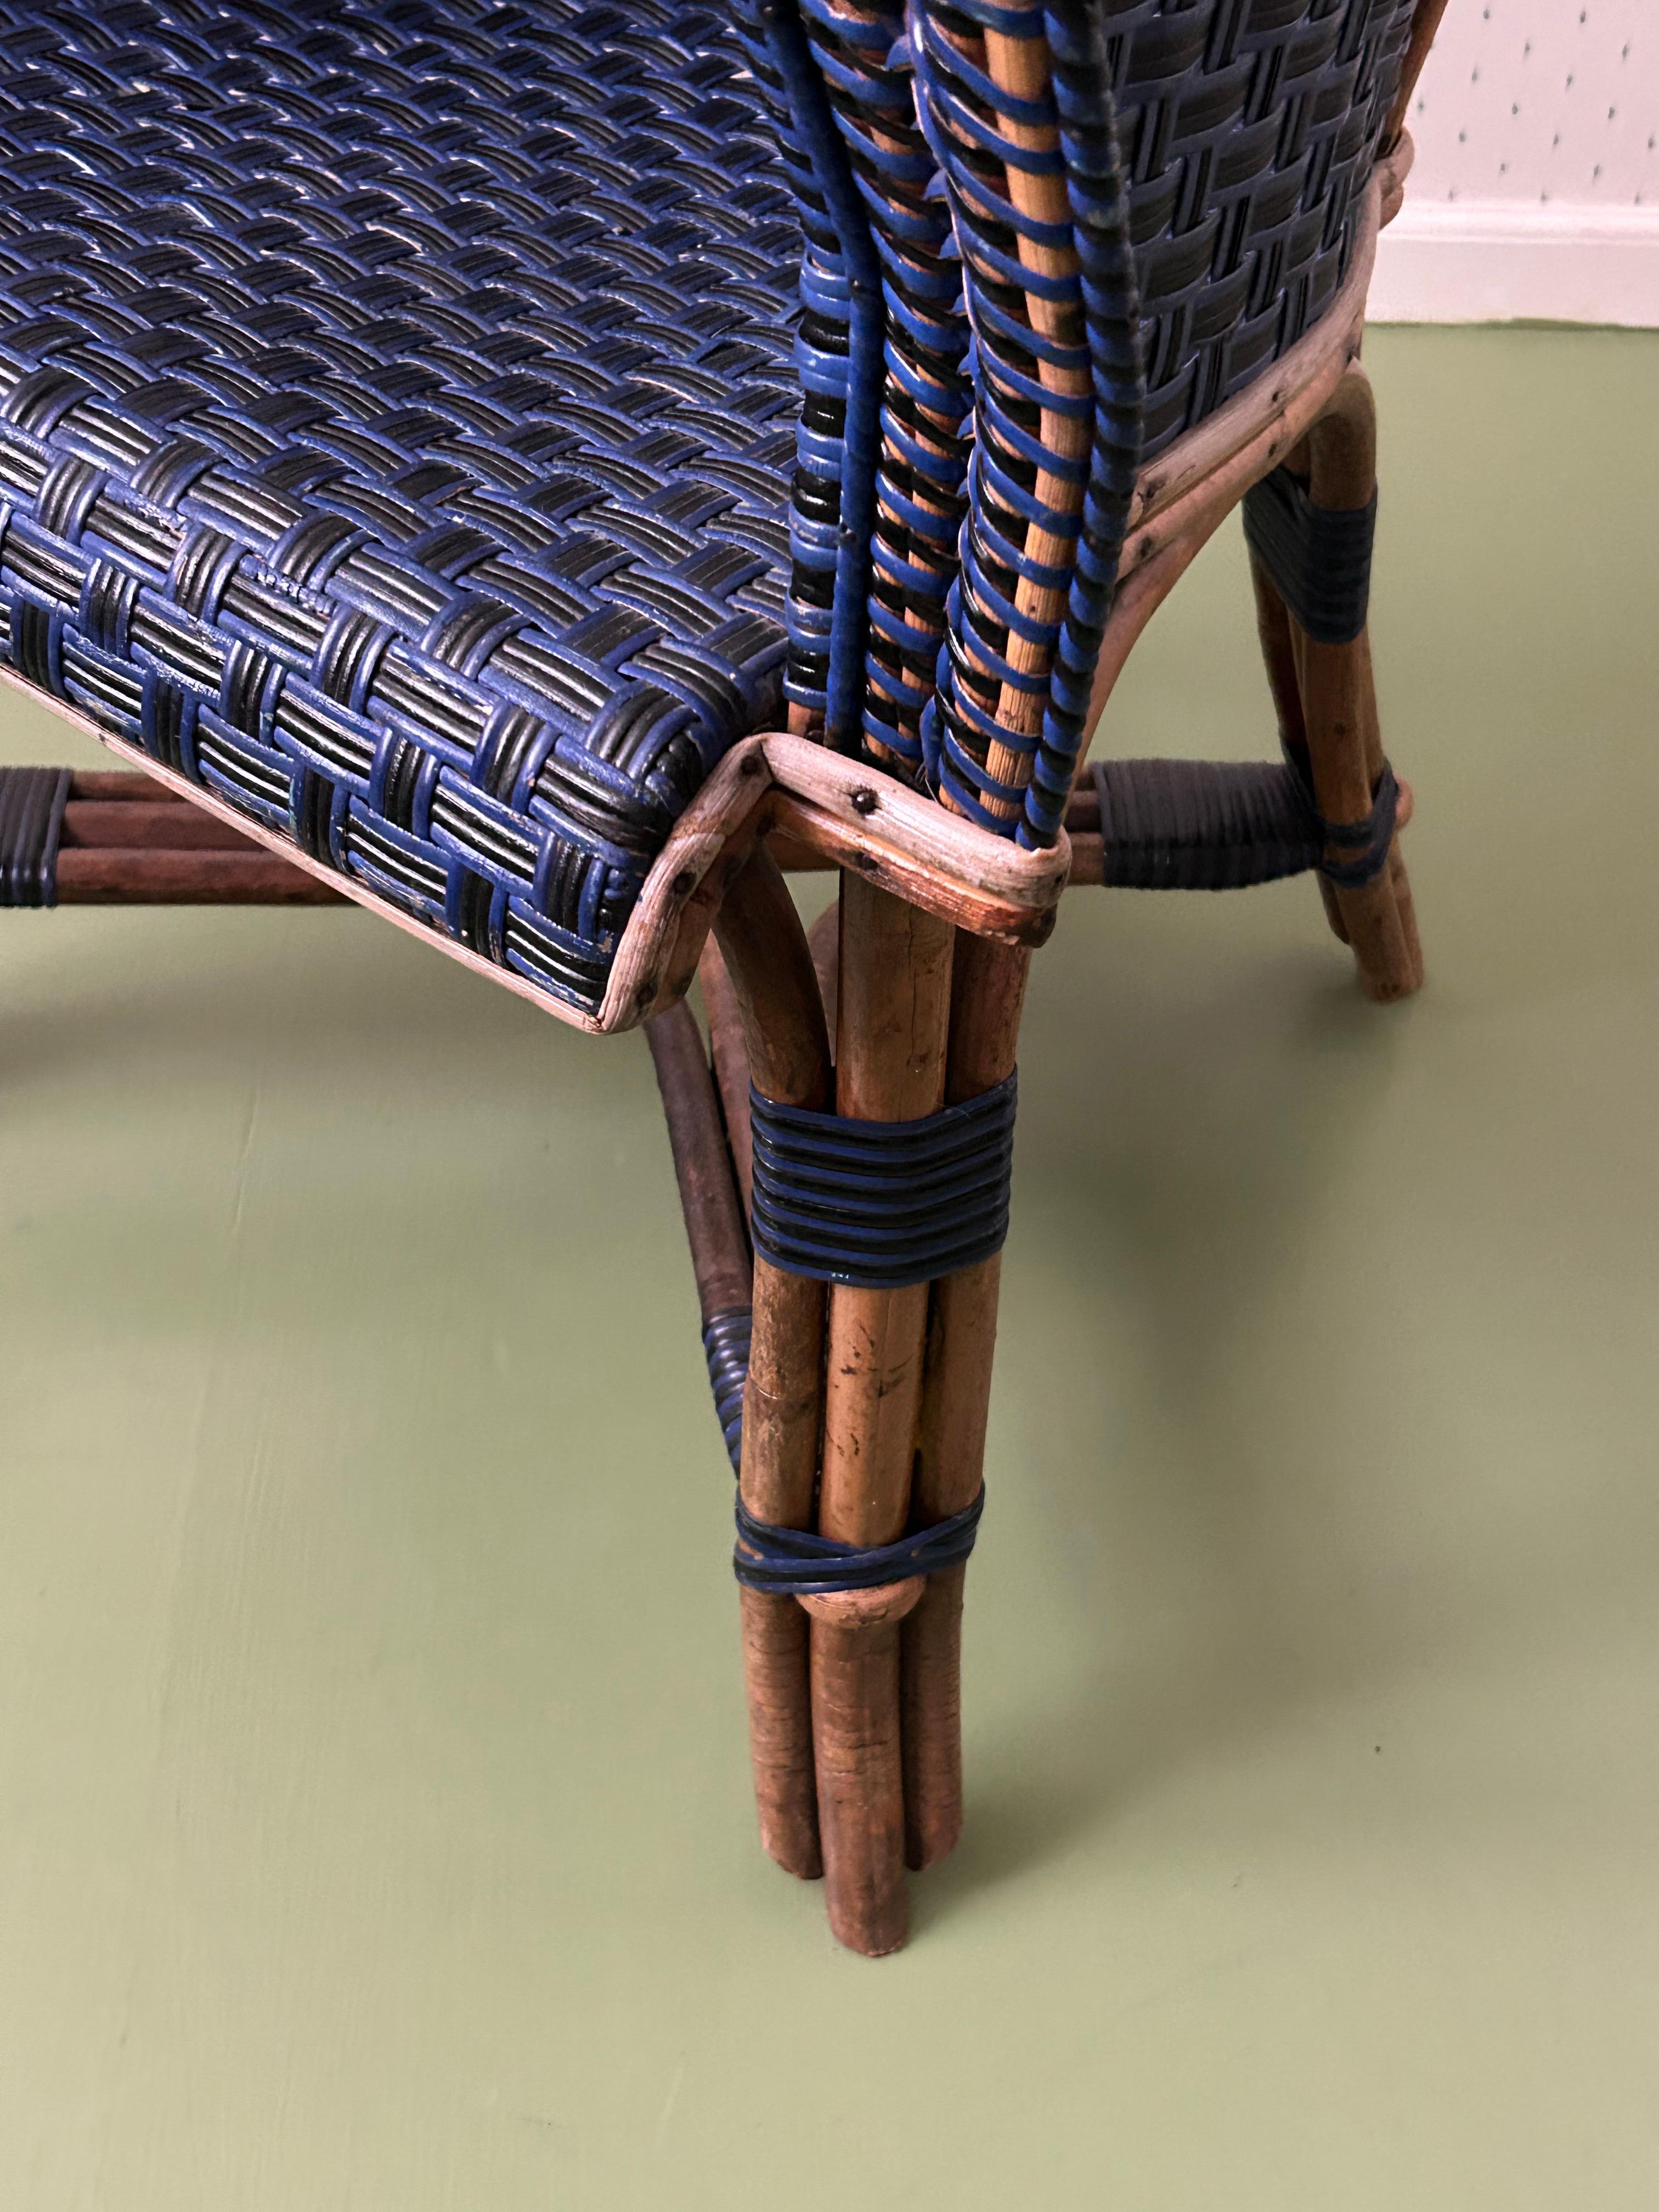 Vintage Rattan Chair in Black and Blue, France, Early 20th Century For Sale 4